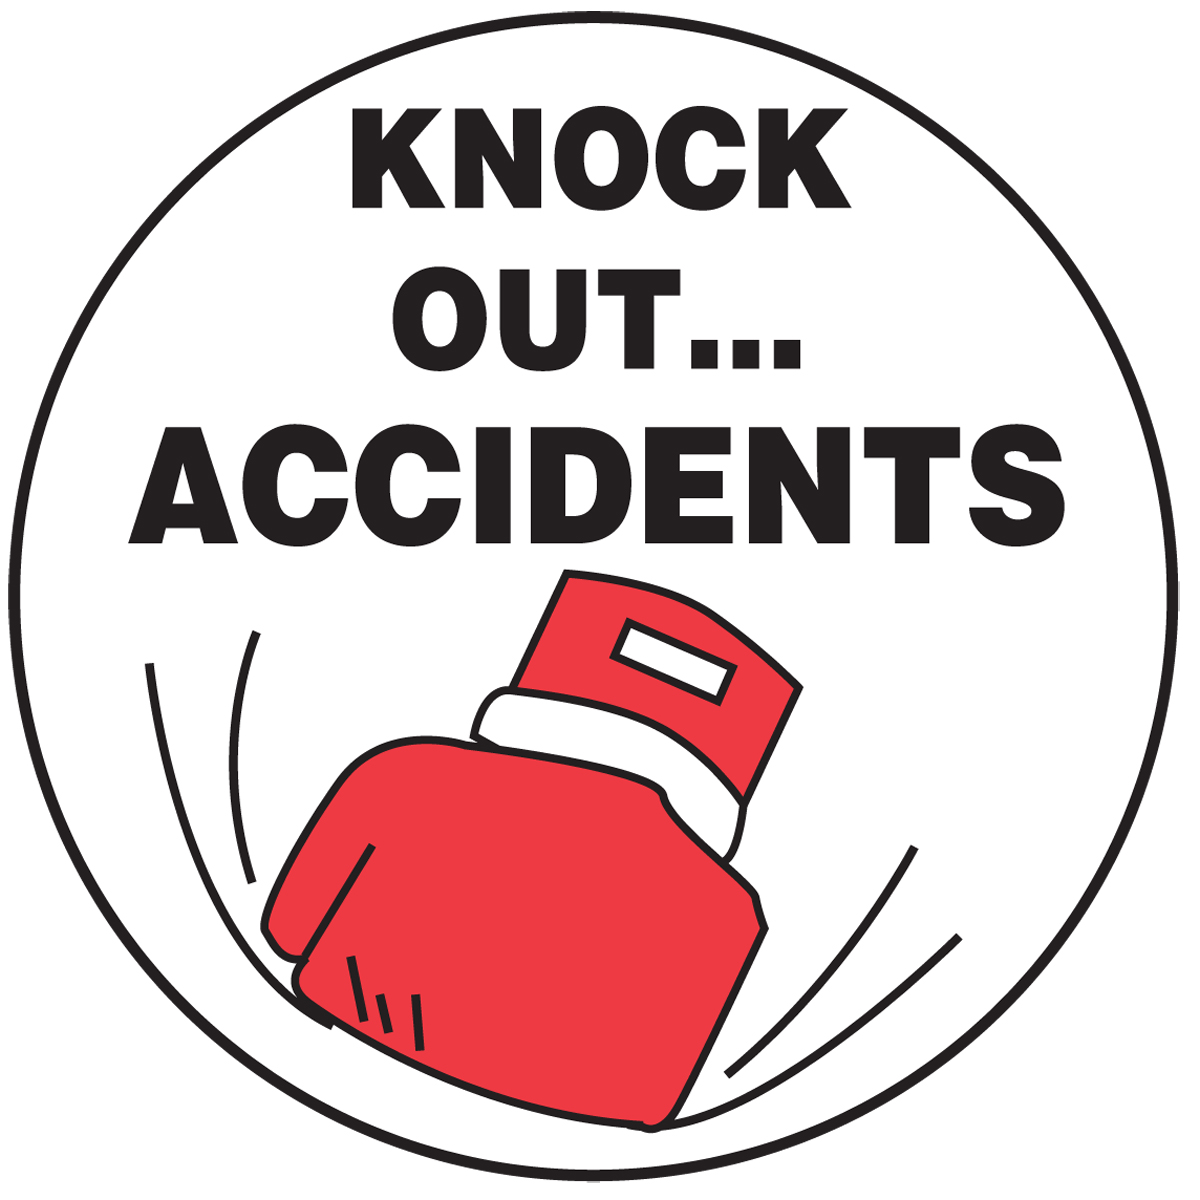 KNOCK OUT…ACCIDENTS